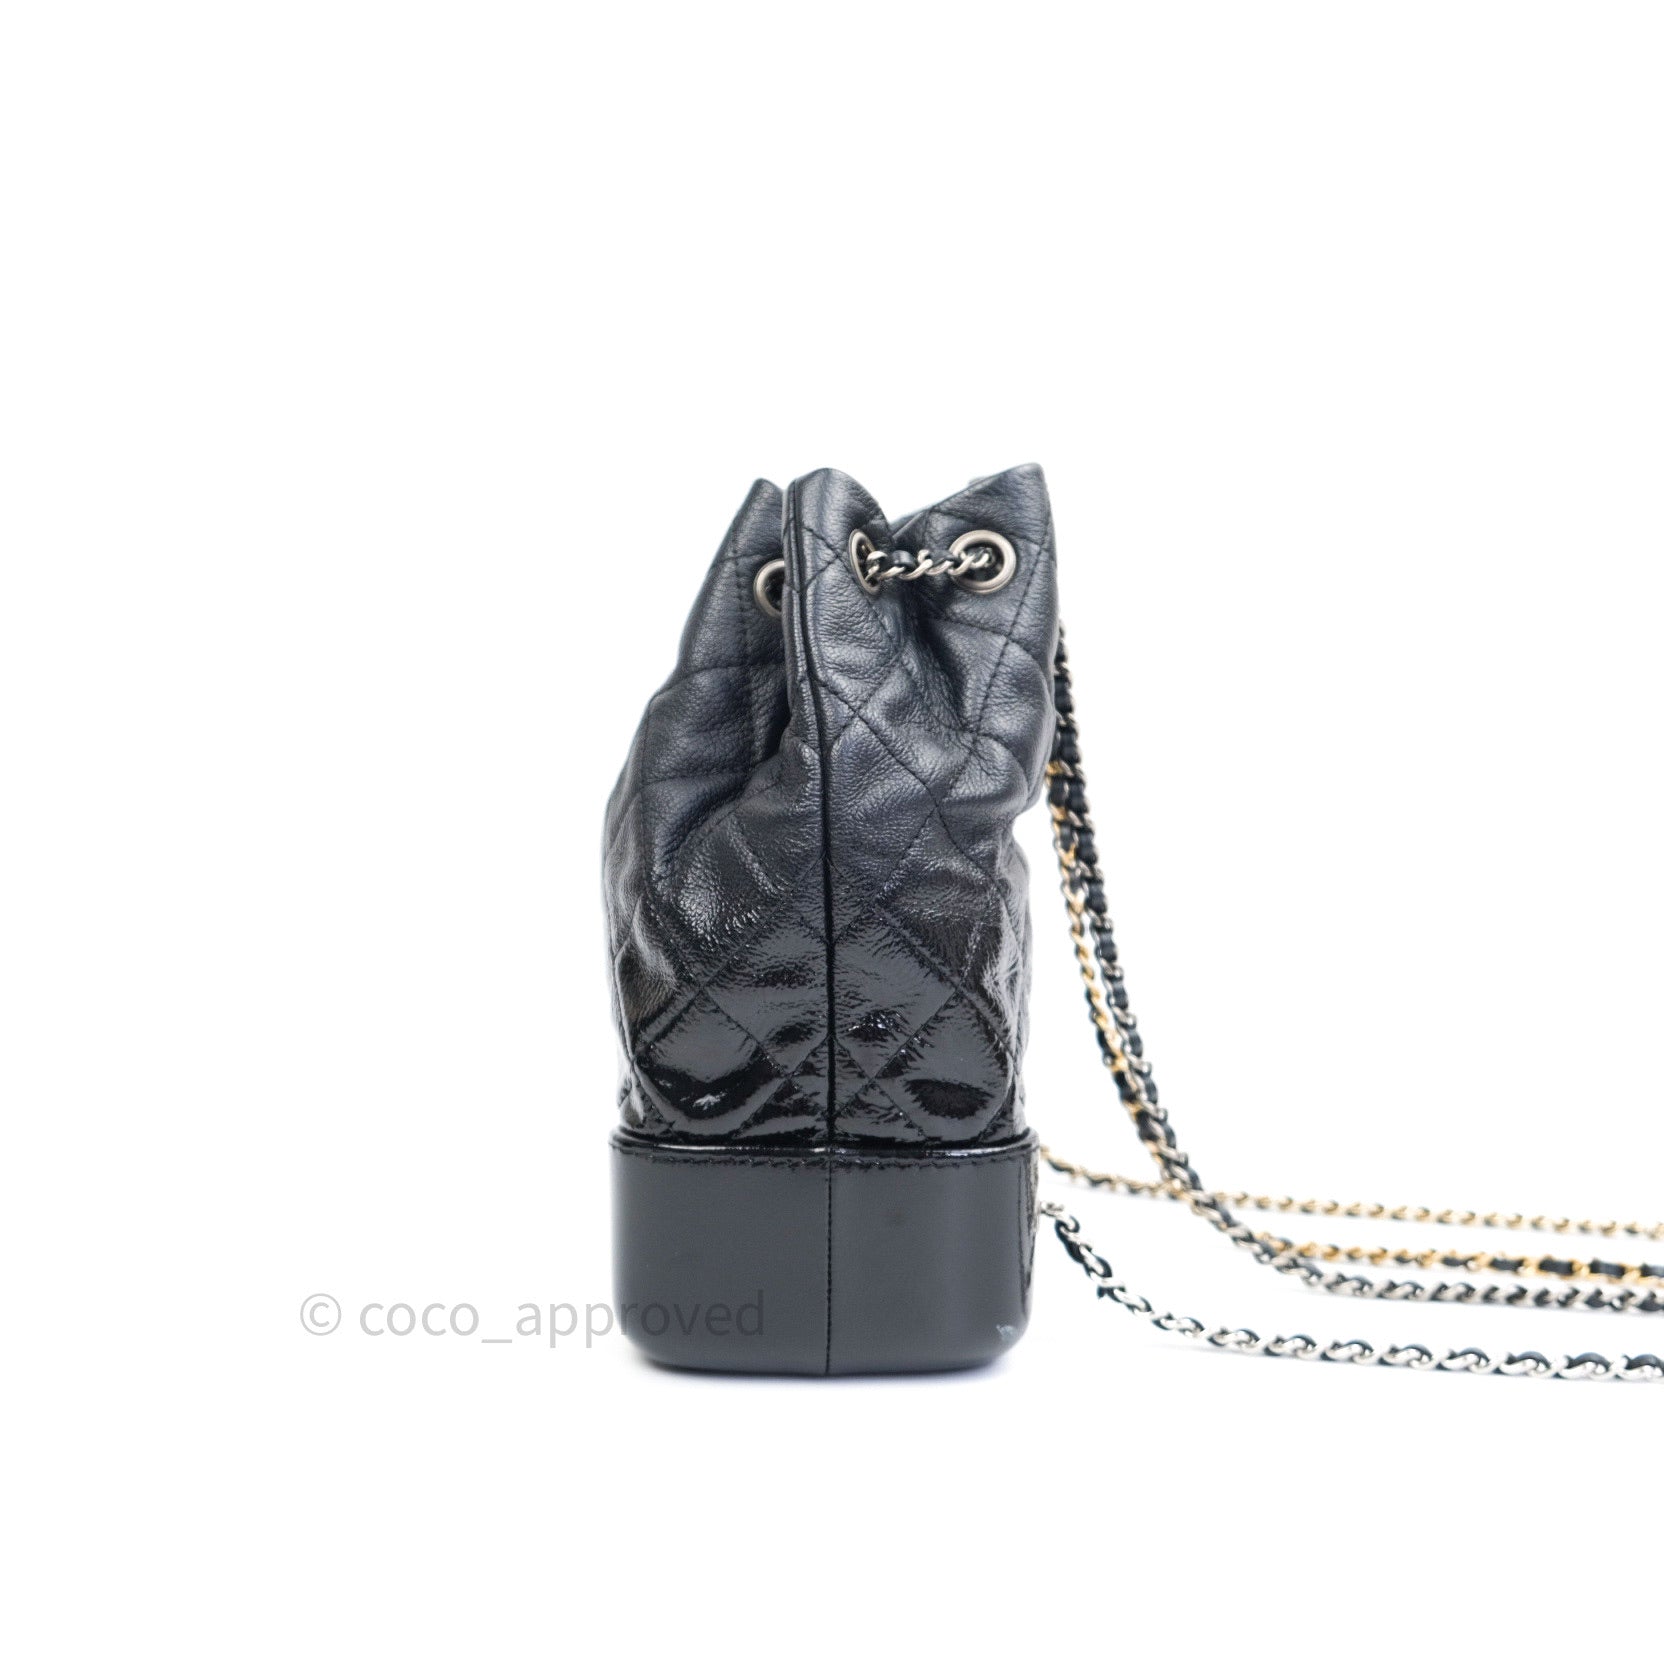 bag, chanel gabrielle backpack, backpack, metallic, silver, ring, skirt,  accessory, chanel bag, chanel - Wheretoget